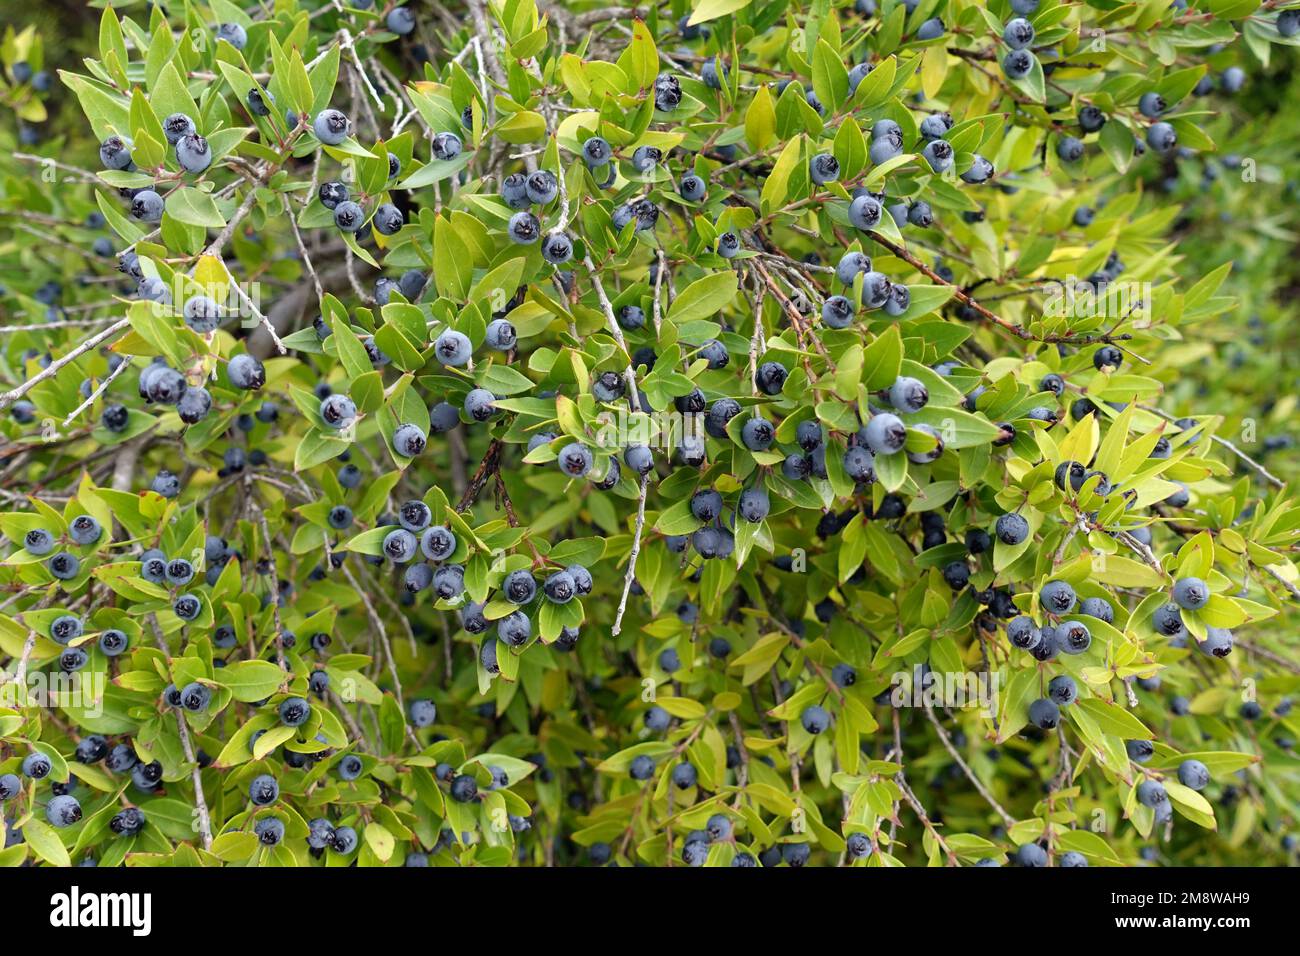 Wild myrtle tree branches with blue berries. Stock Photo